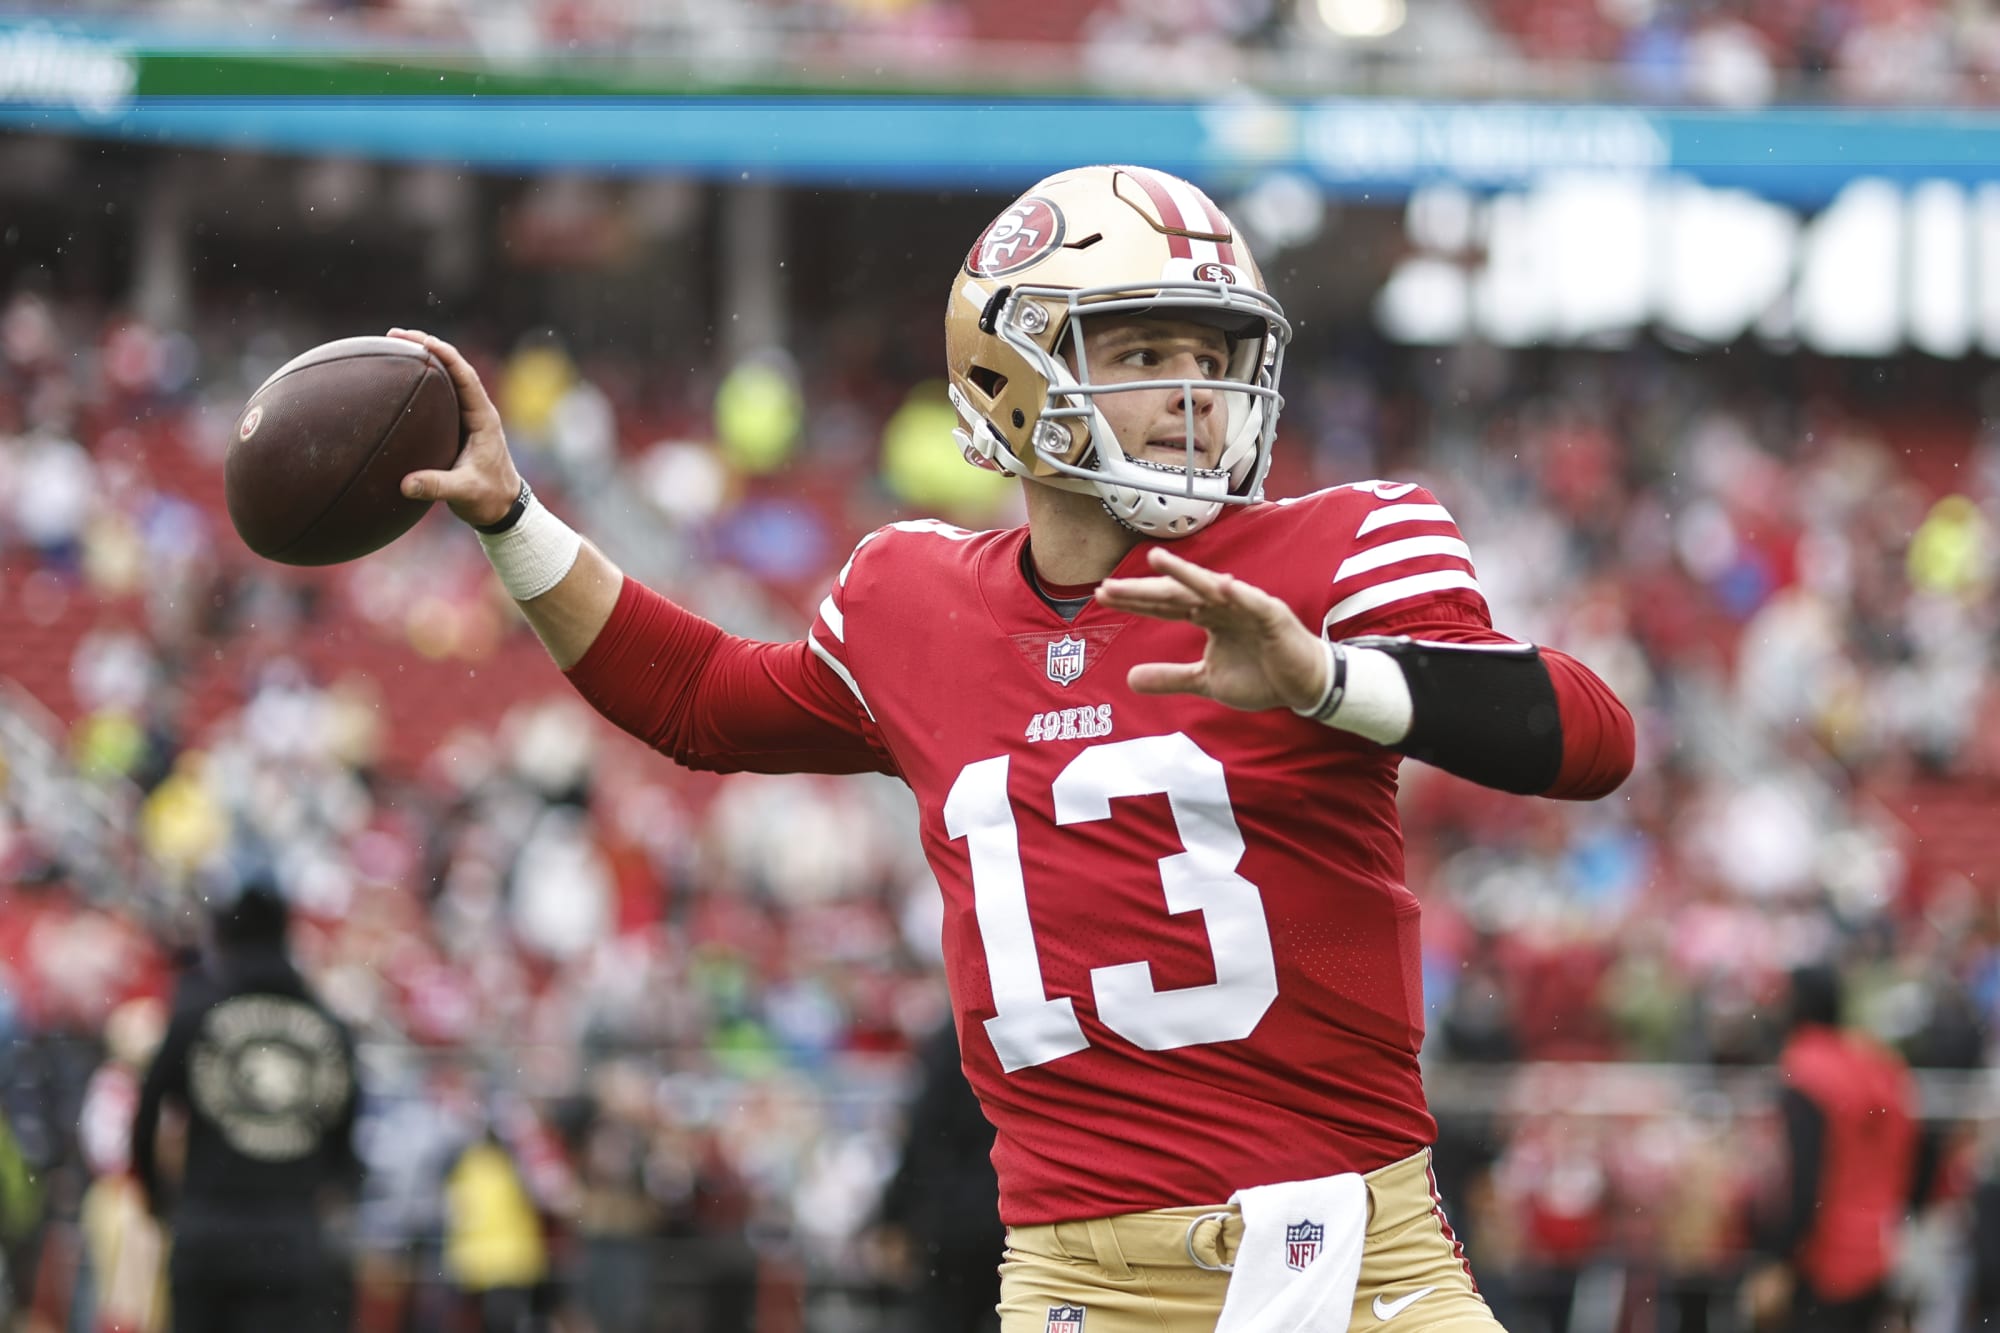 Brock Purdy is ready to take over for Jimmy Garoppolo full-time now